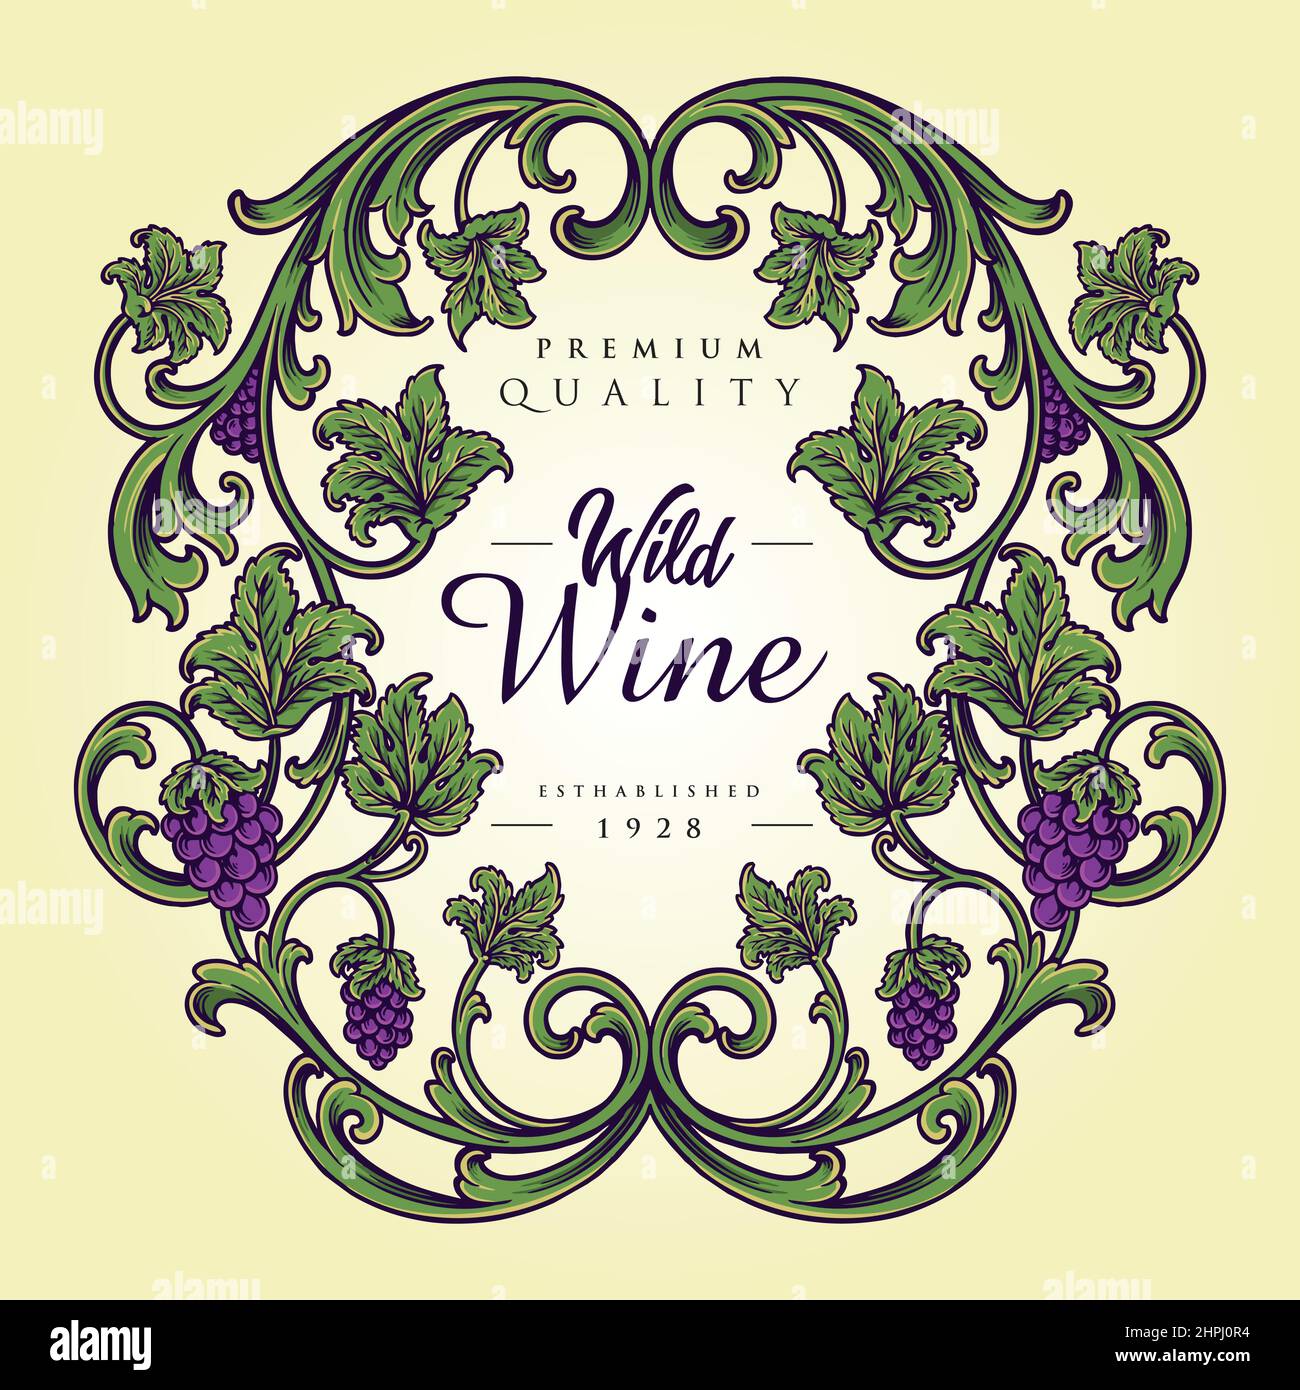 Luxury vintage wine floral label vector illustrations for your work logo, merchandise t-shirt, stickers and label designs, poster, greeting cards Stock Vector